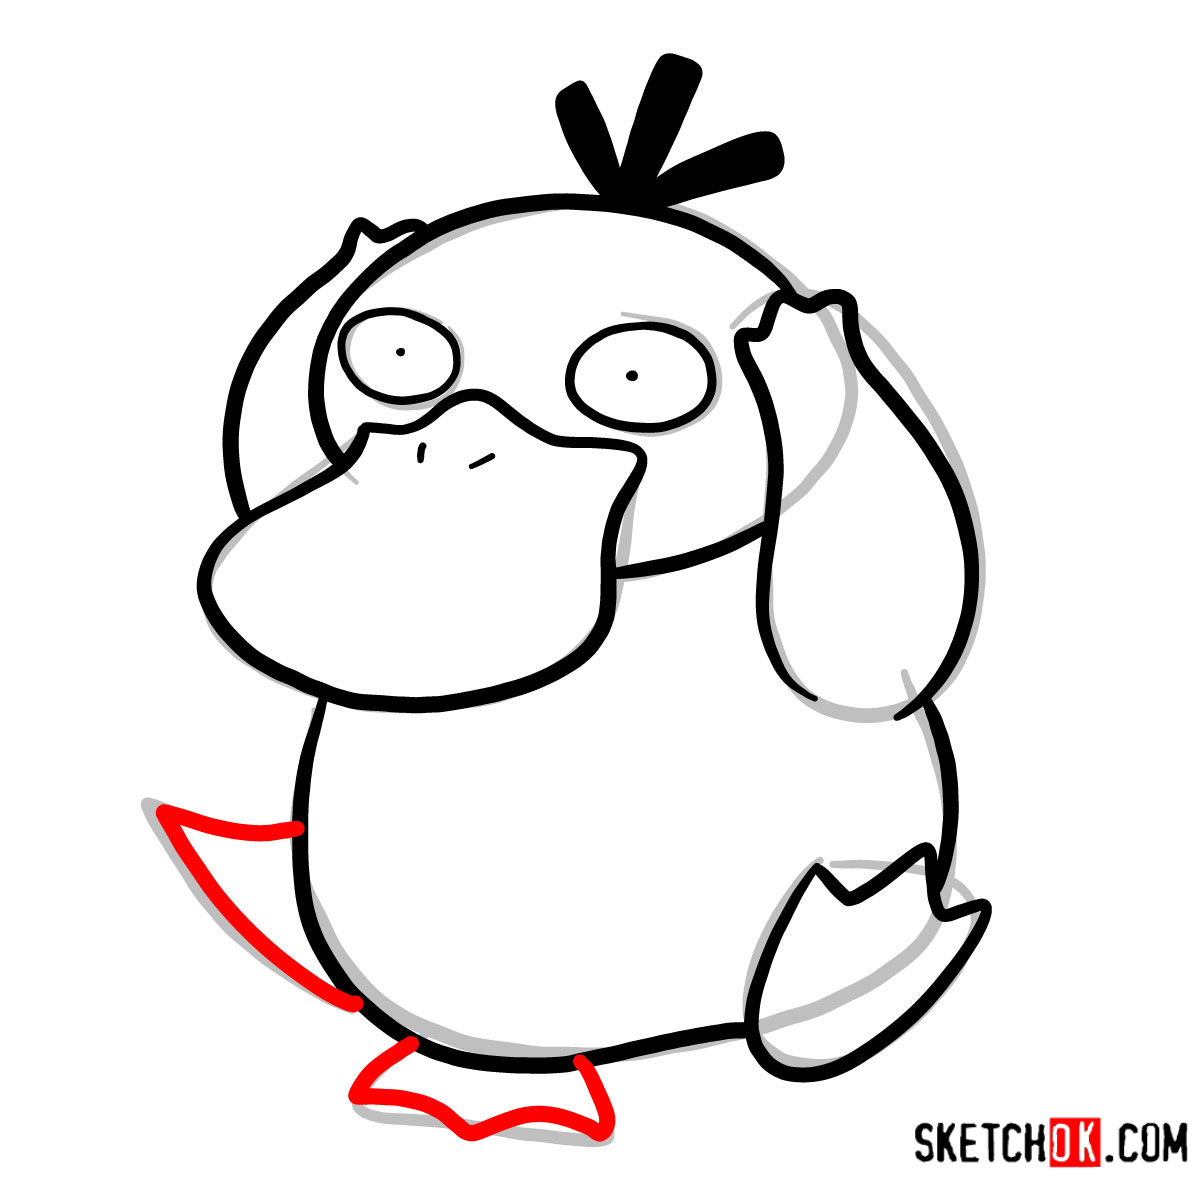 How to draw Psyduck Pokemon - step 07.